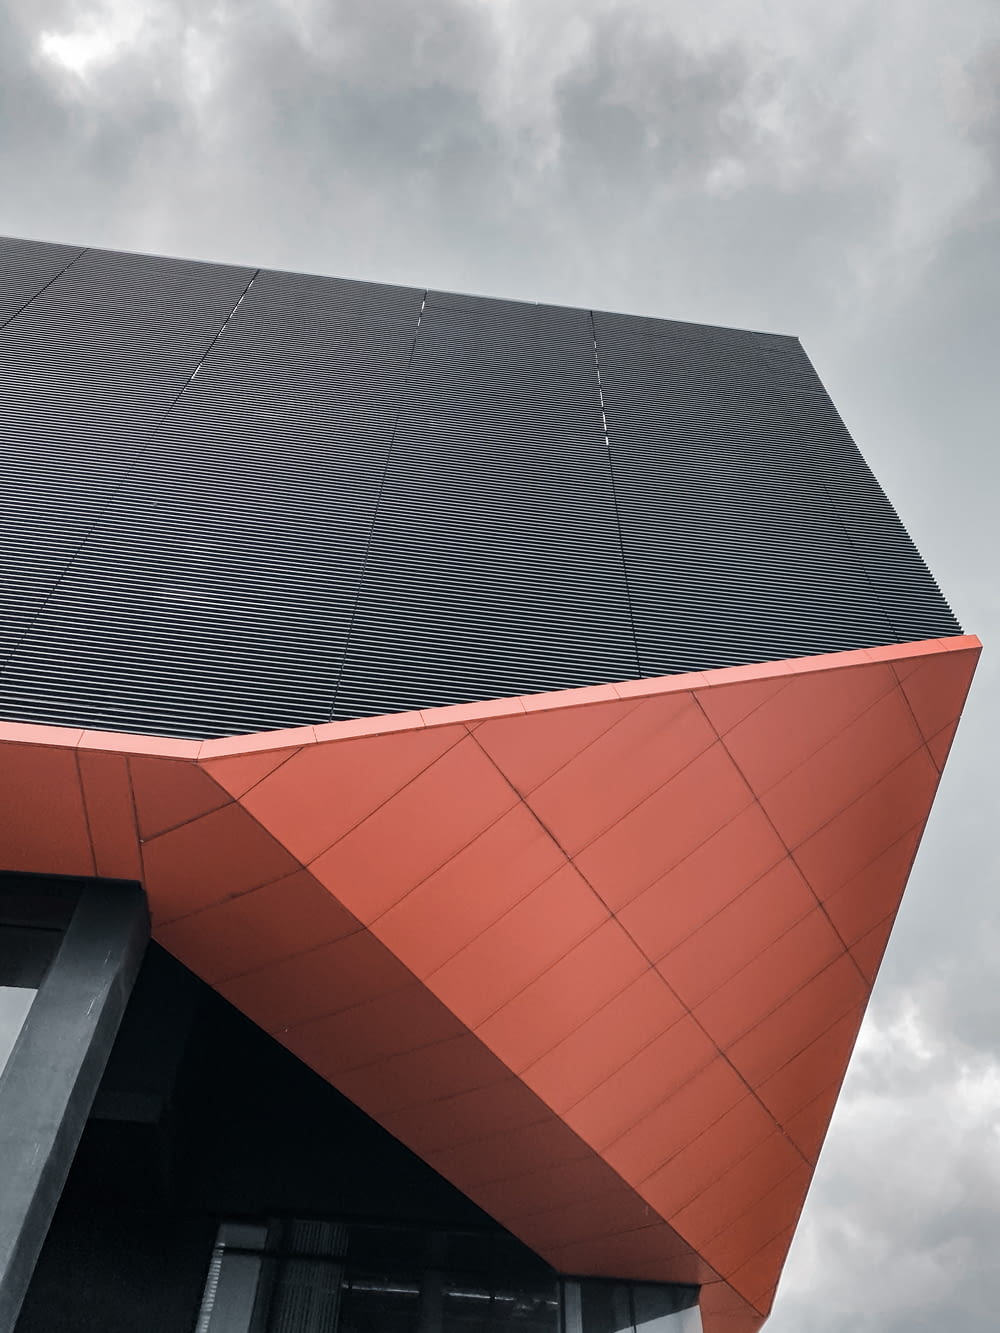 red and black concrete building under white clouds during daytime